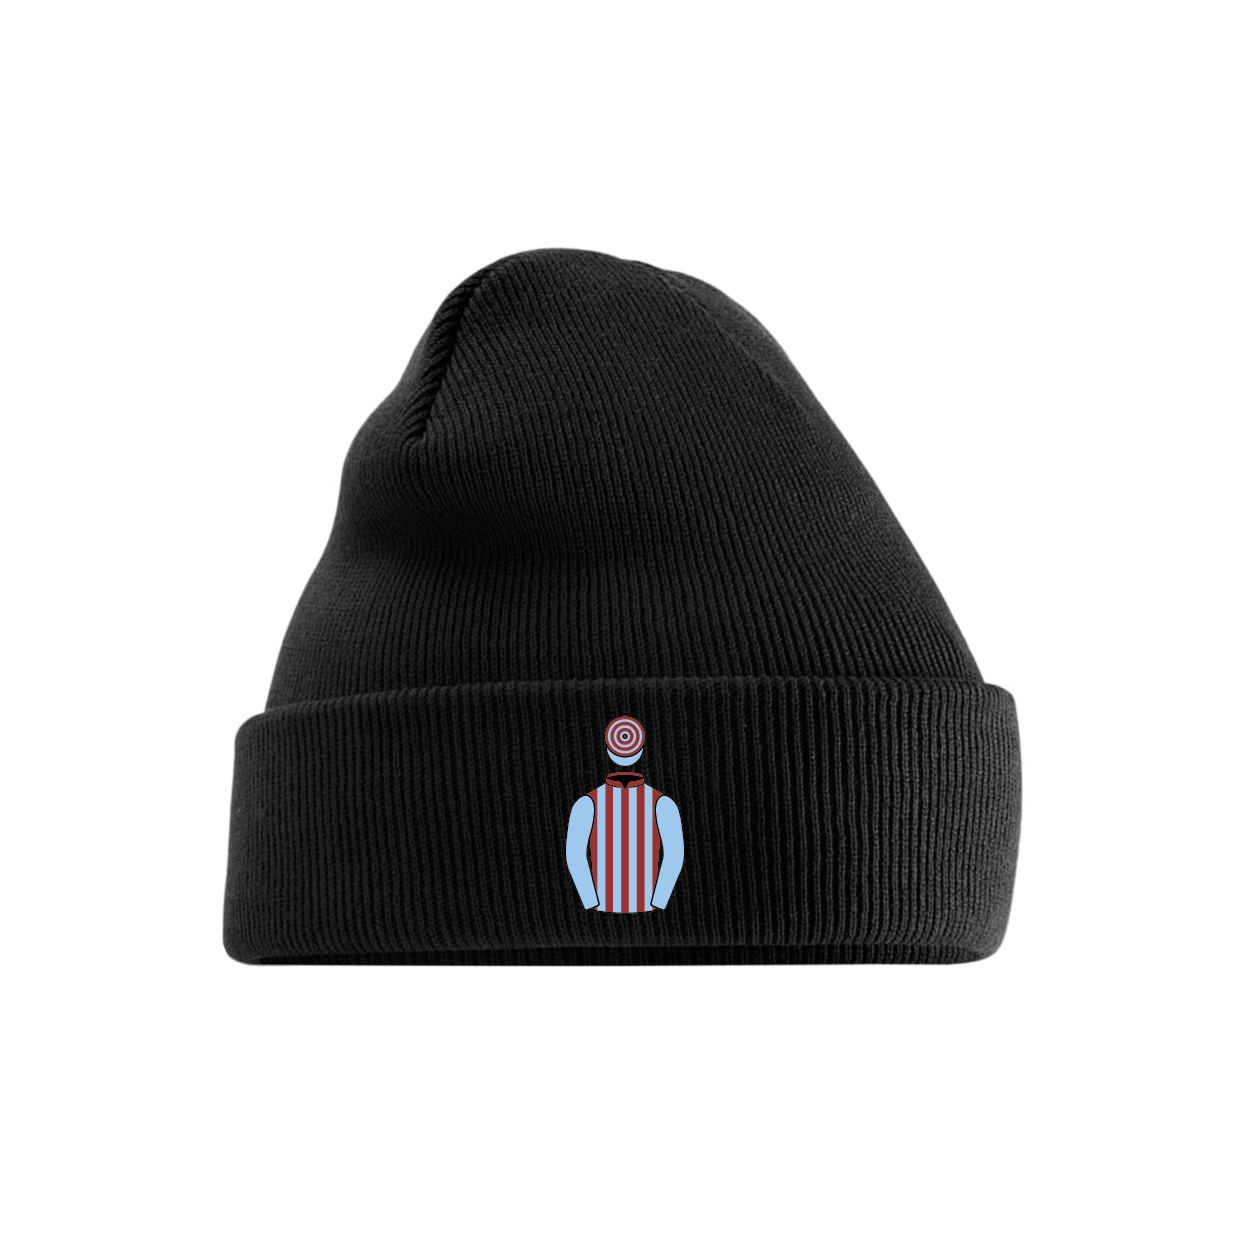 Jim Lewis Embroidered Cuffed Beanie - Hacked Up